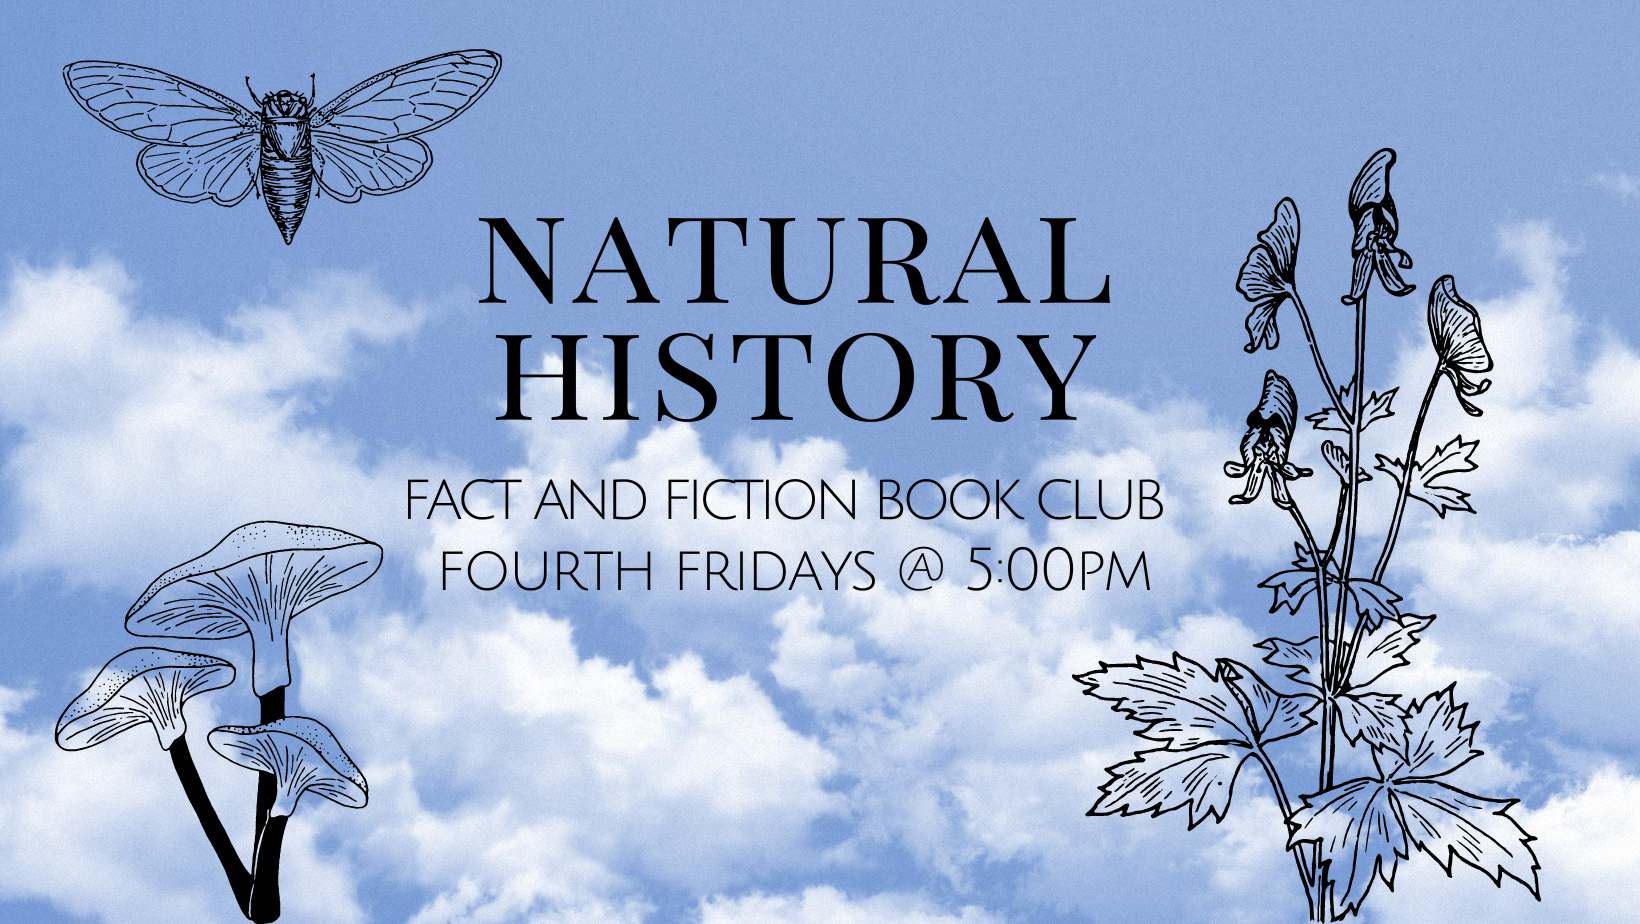 Natural History Fact and Fiction Book Club